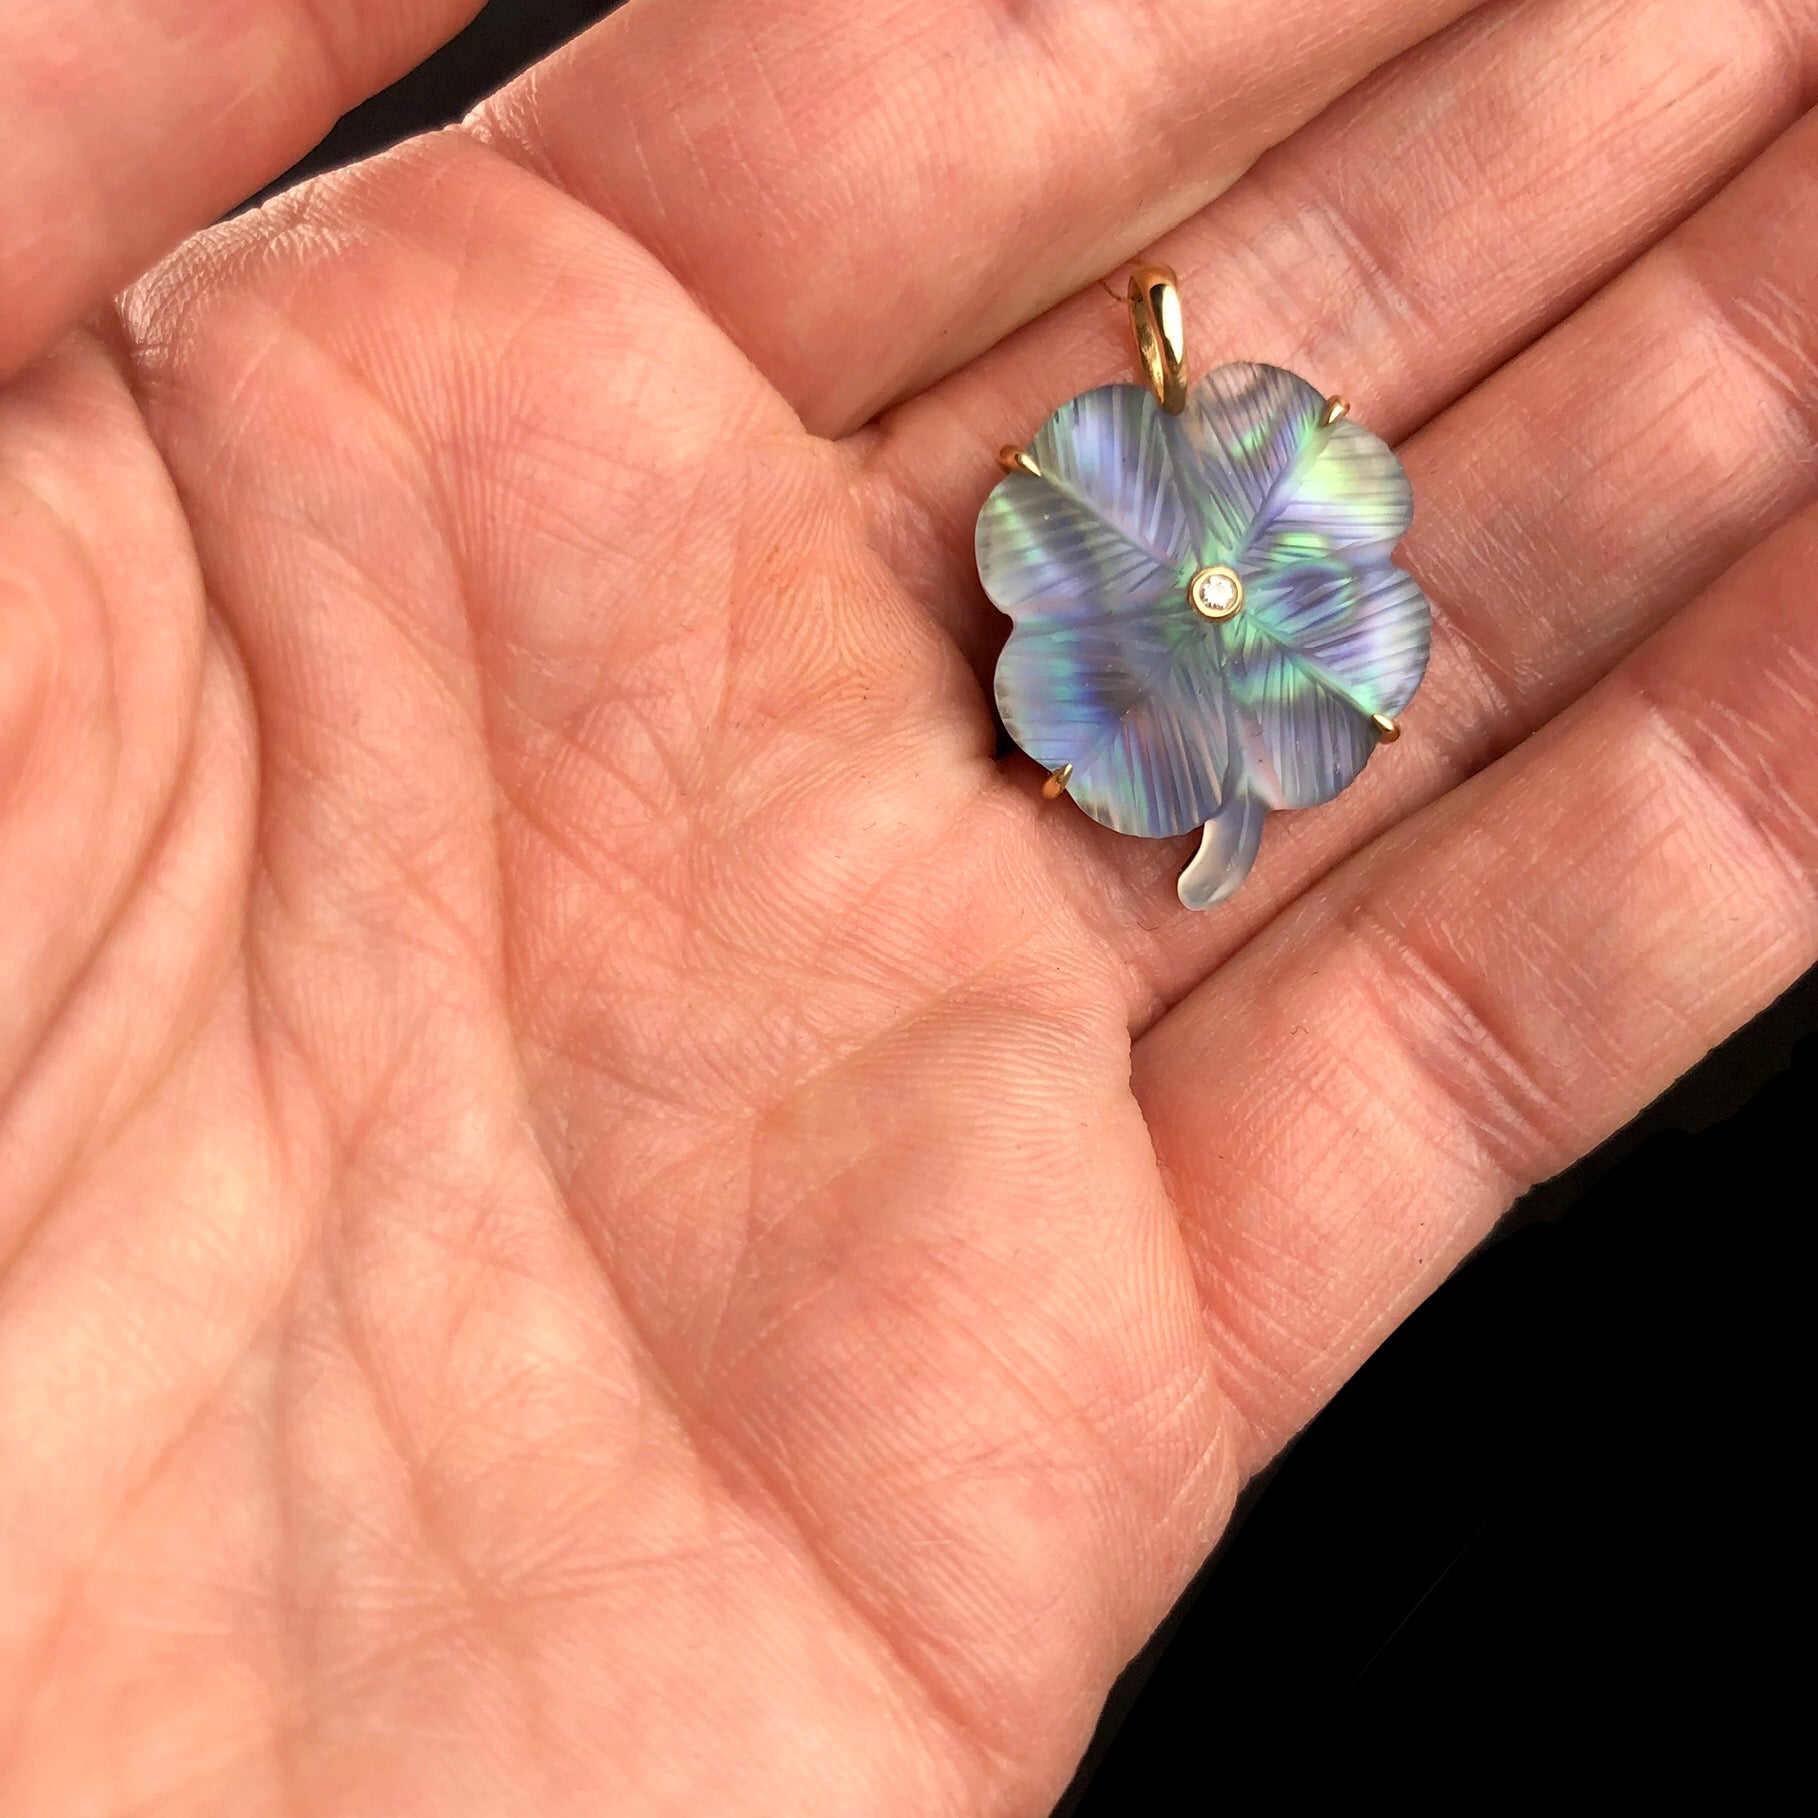 Luminescent Clover Charm shown in hand for size reference